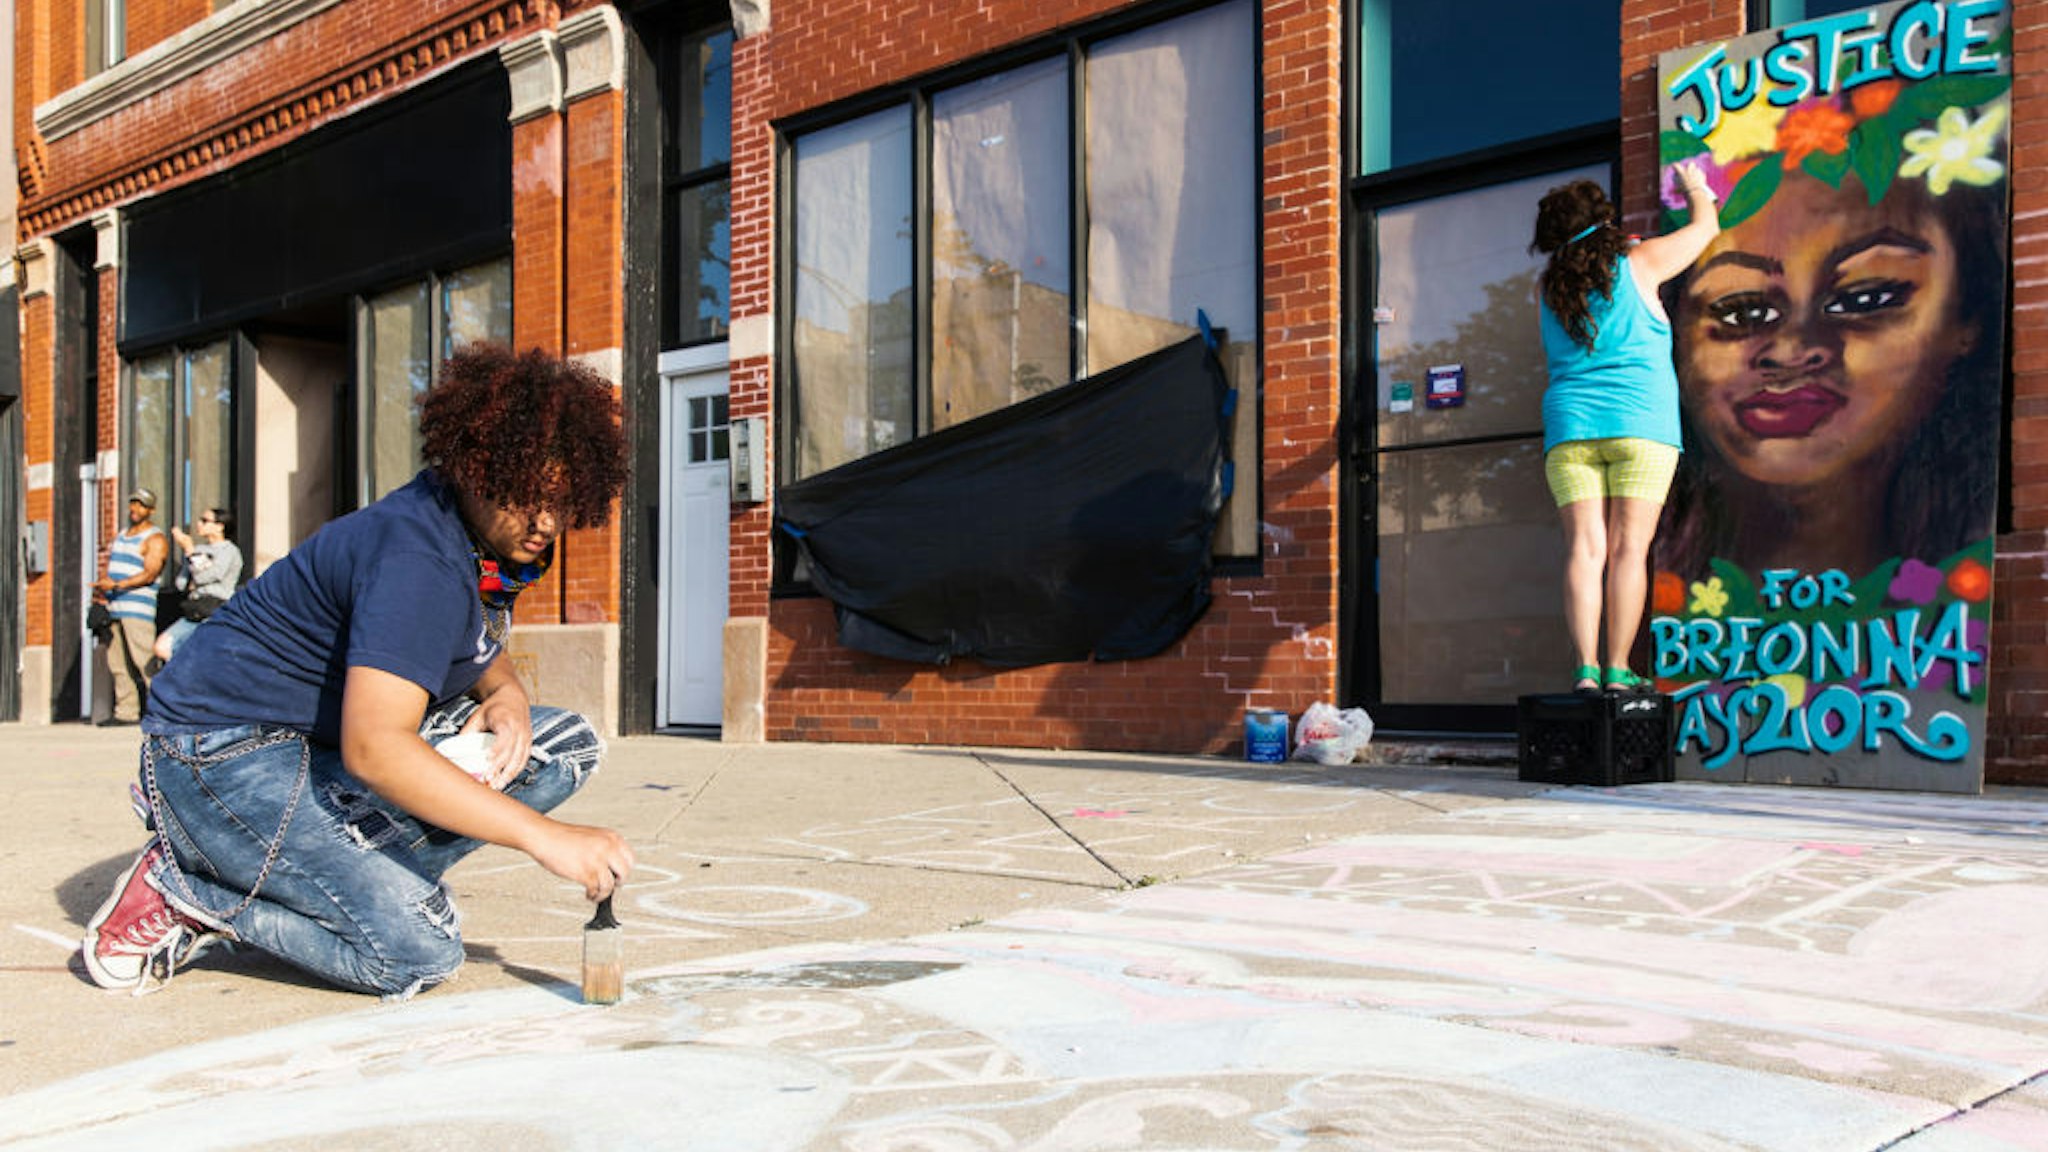 CHICAGO, ILLINOIS - JUNE 06: Street artists create work in memory of Breonna Taylor on June 06, 2020 in Chicago, Illinois. This is the 12th day of protests since George Floyd died in Minneapolis police custody on May 25. (Photo by Natasha Moustache/Getty Images)